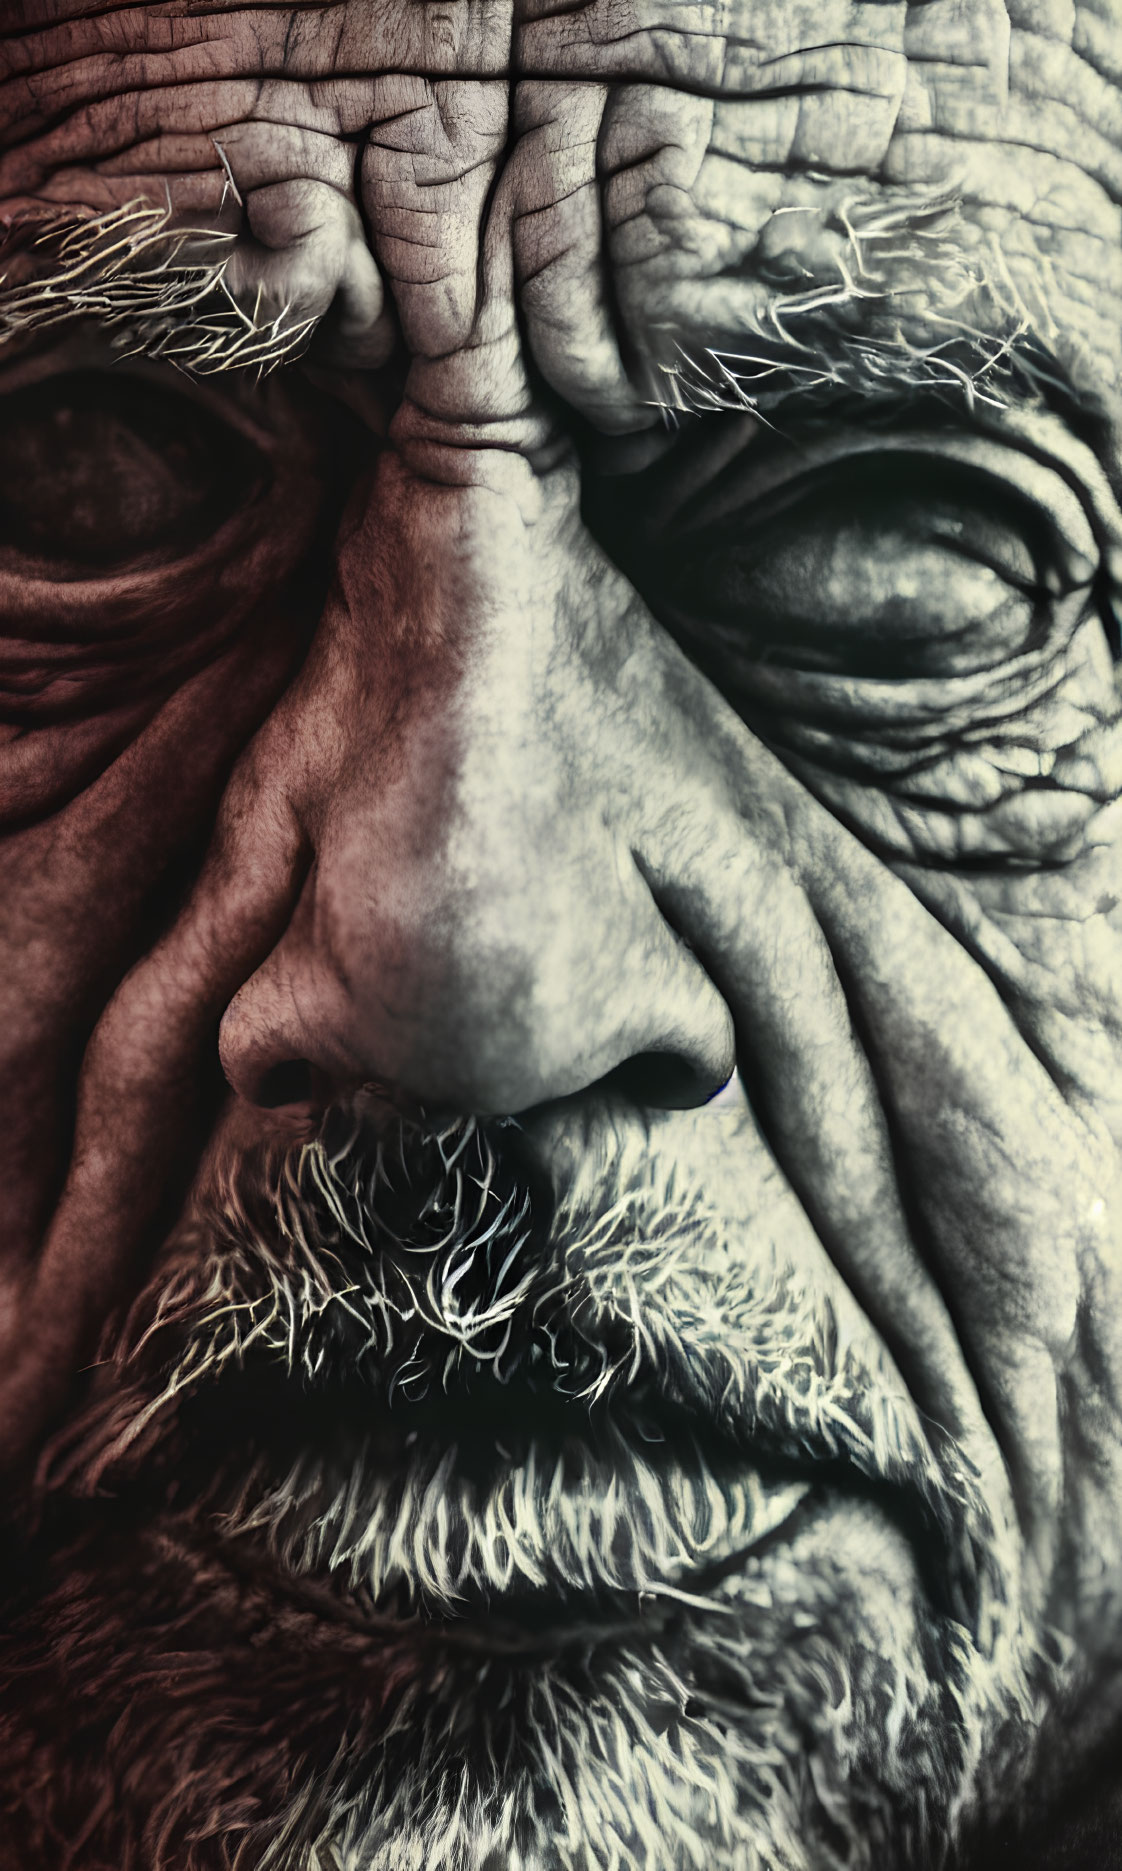 Detailed Portrait of Elderly Man with Deep Wrinkles and White Beard